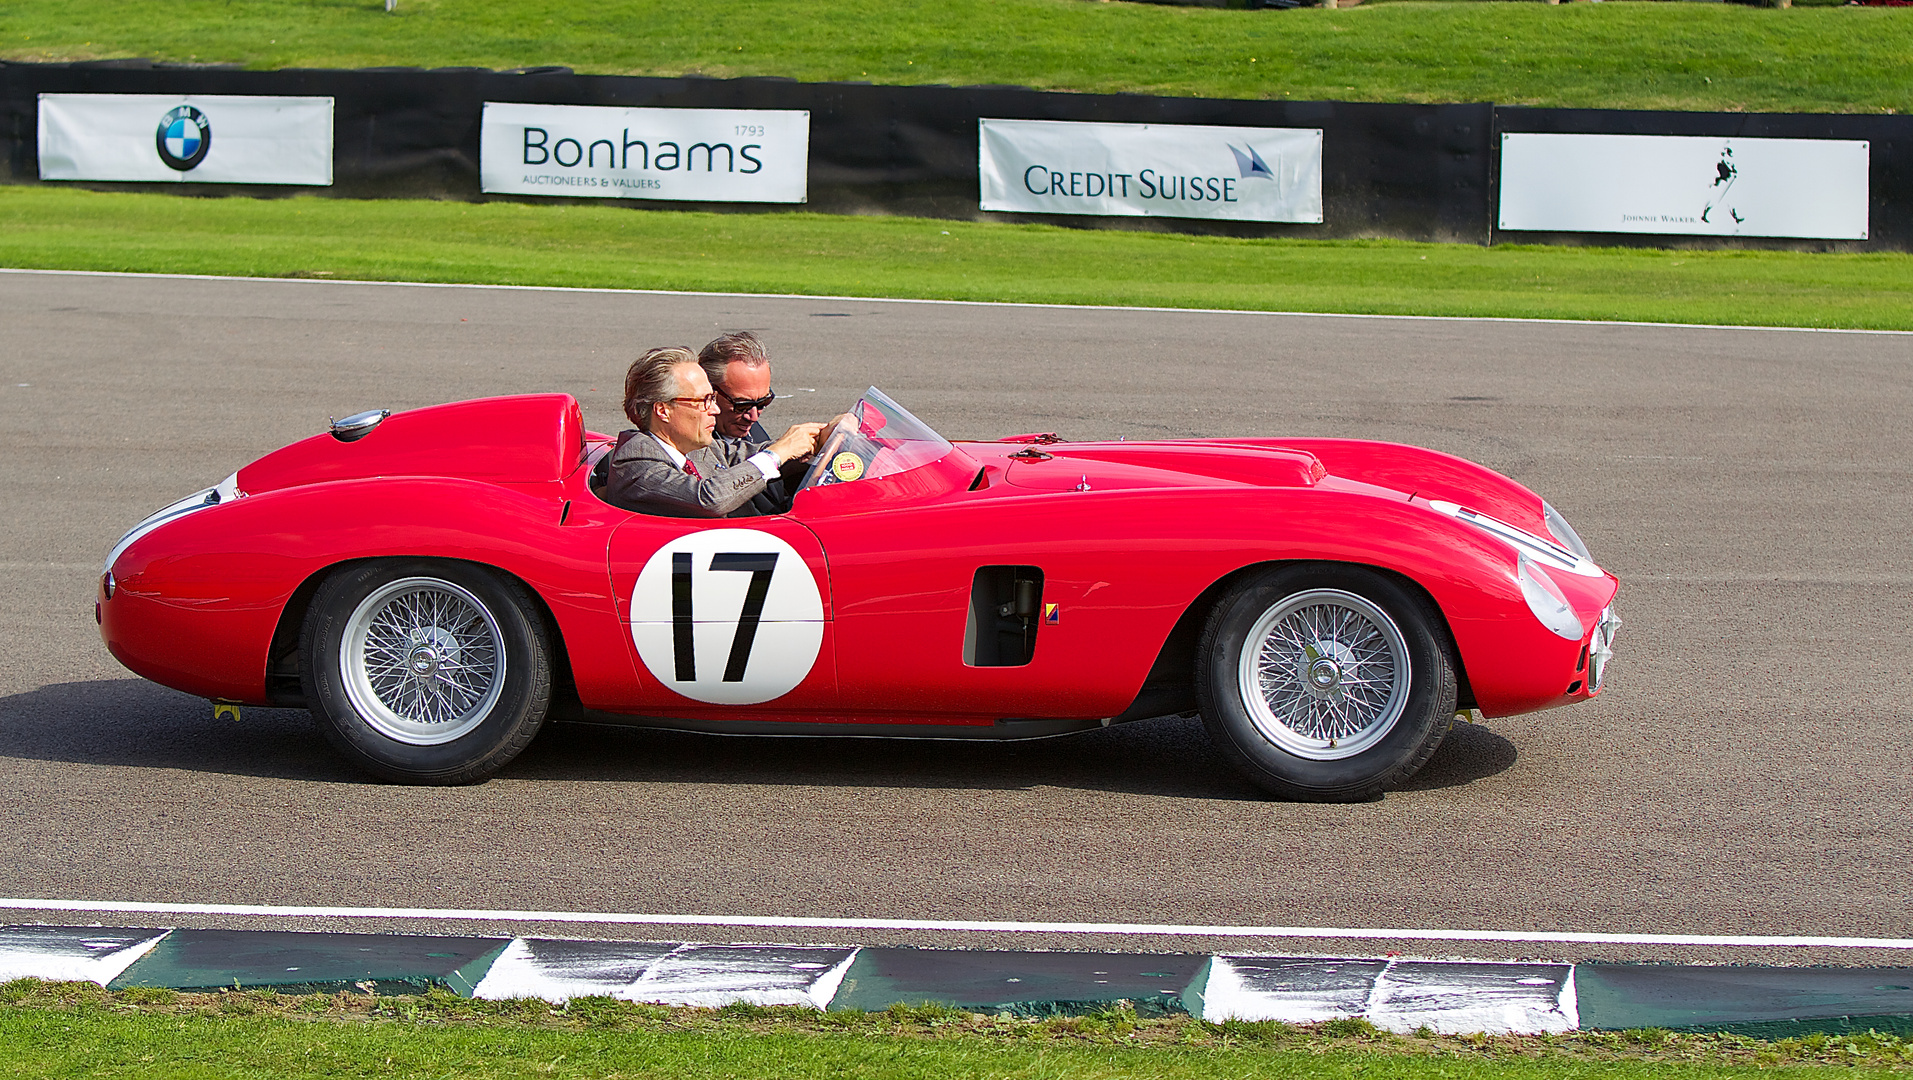 The Earl of March himself at Goodwood Revival